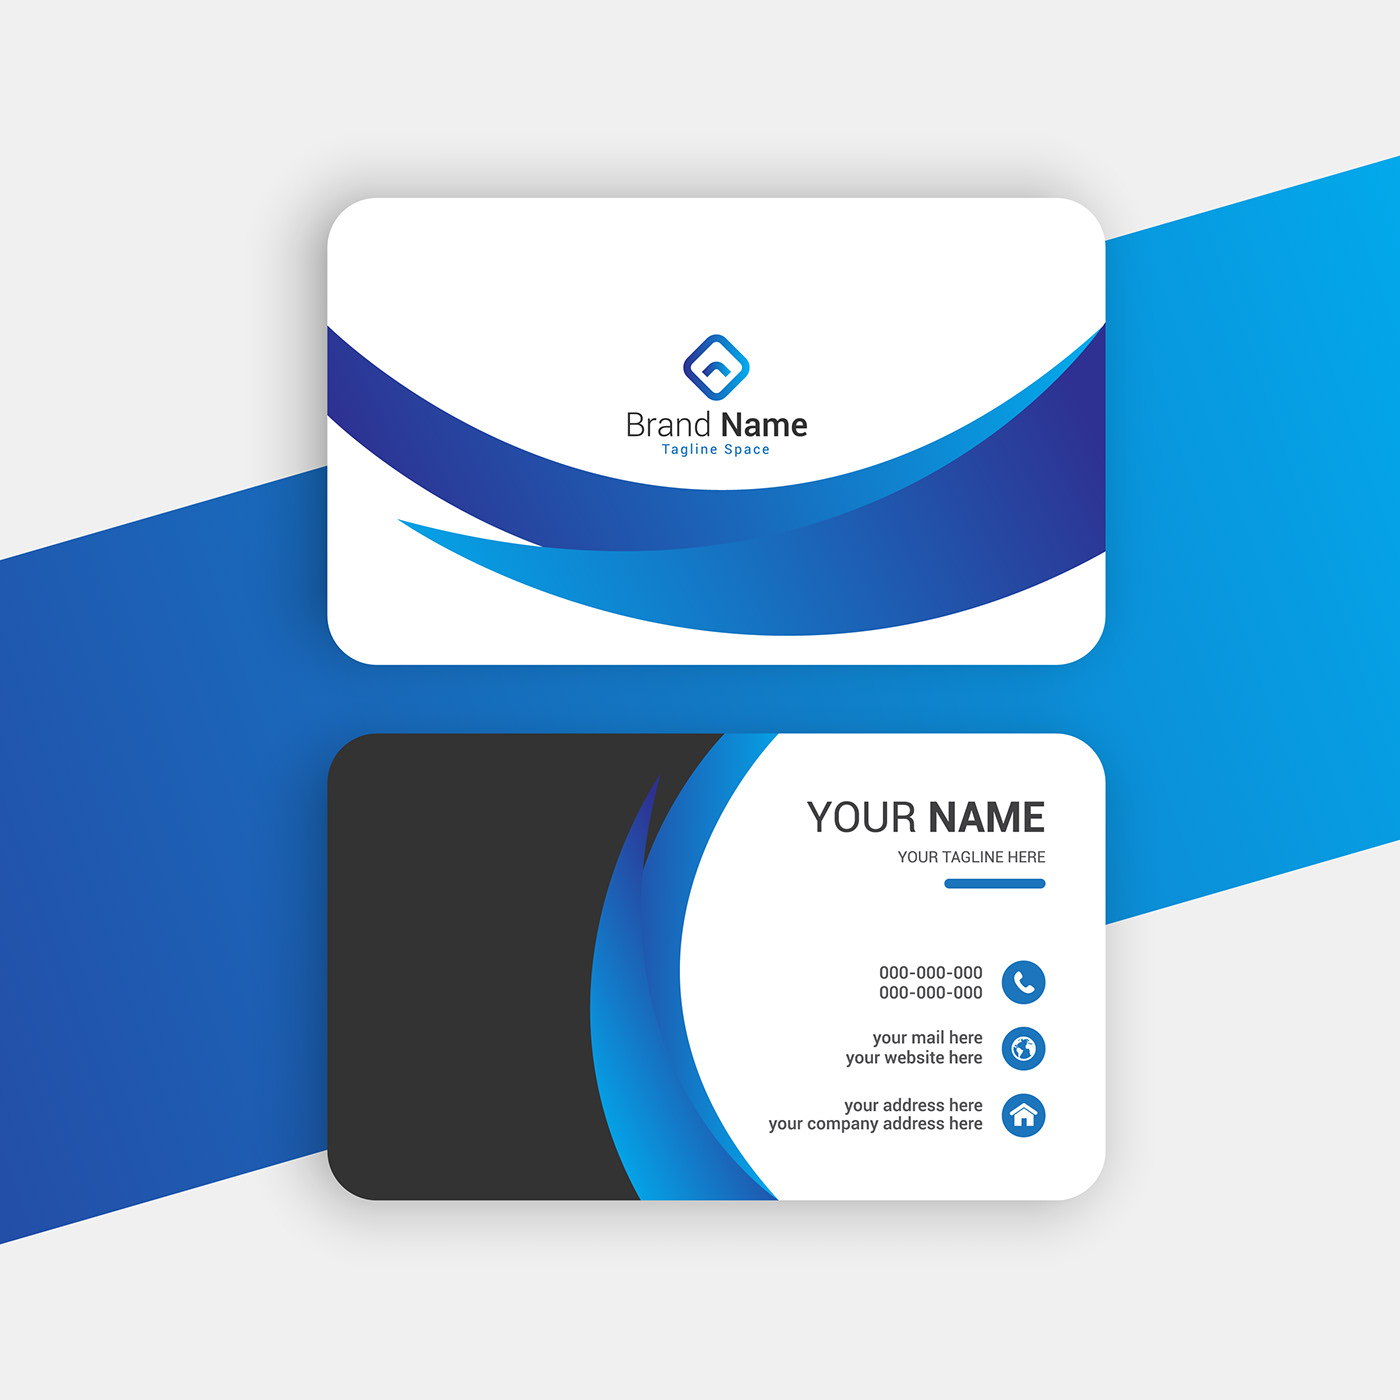 Business Cards identity visiting card Business Design card corporate business Graphic Designer design minimalist